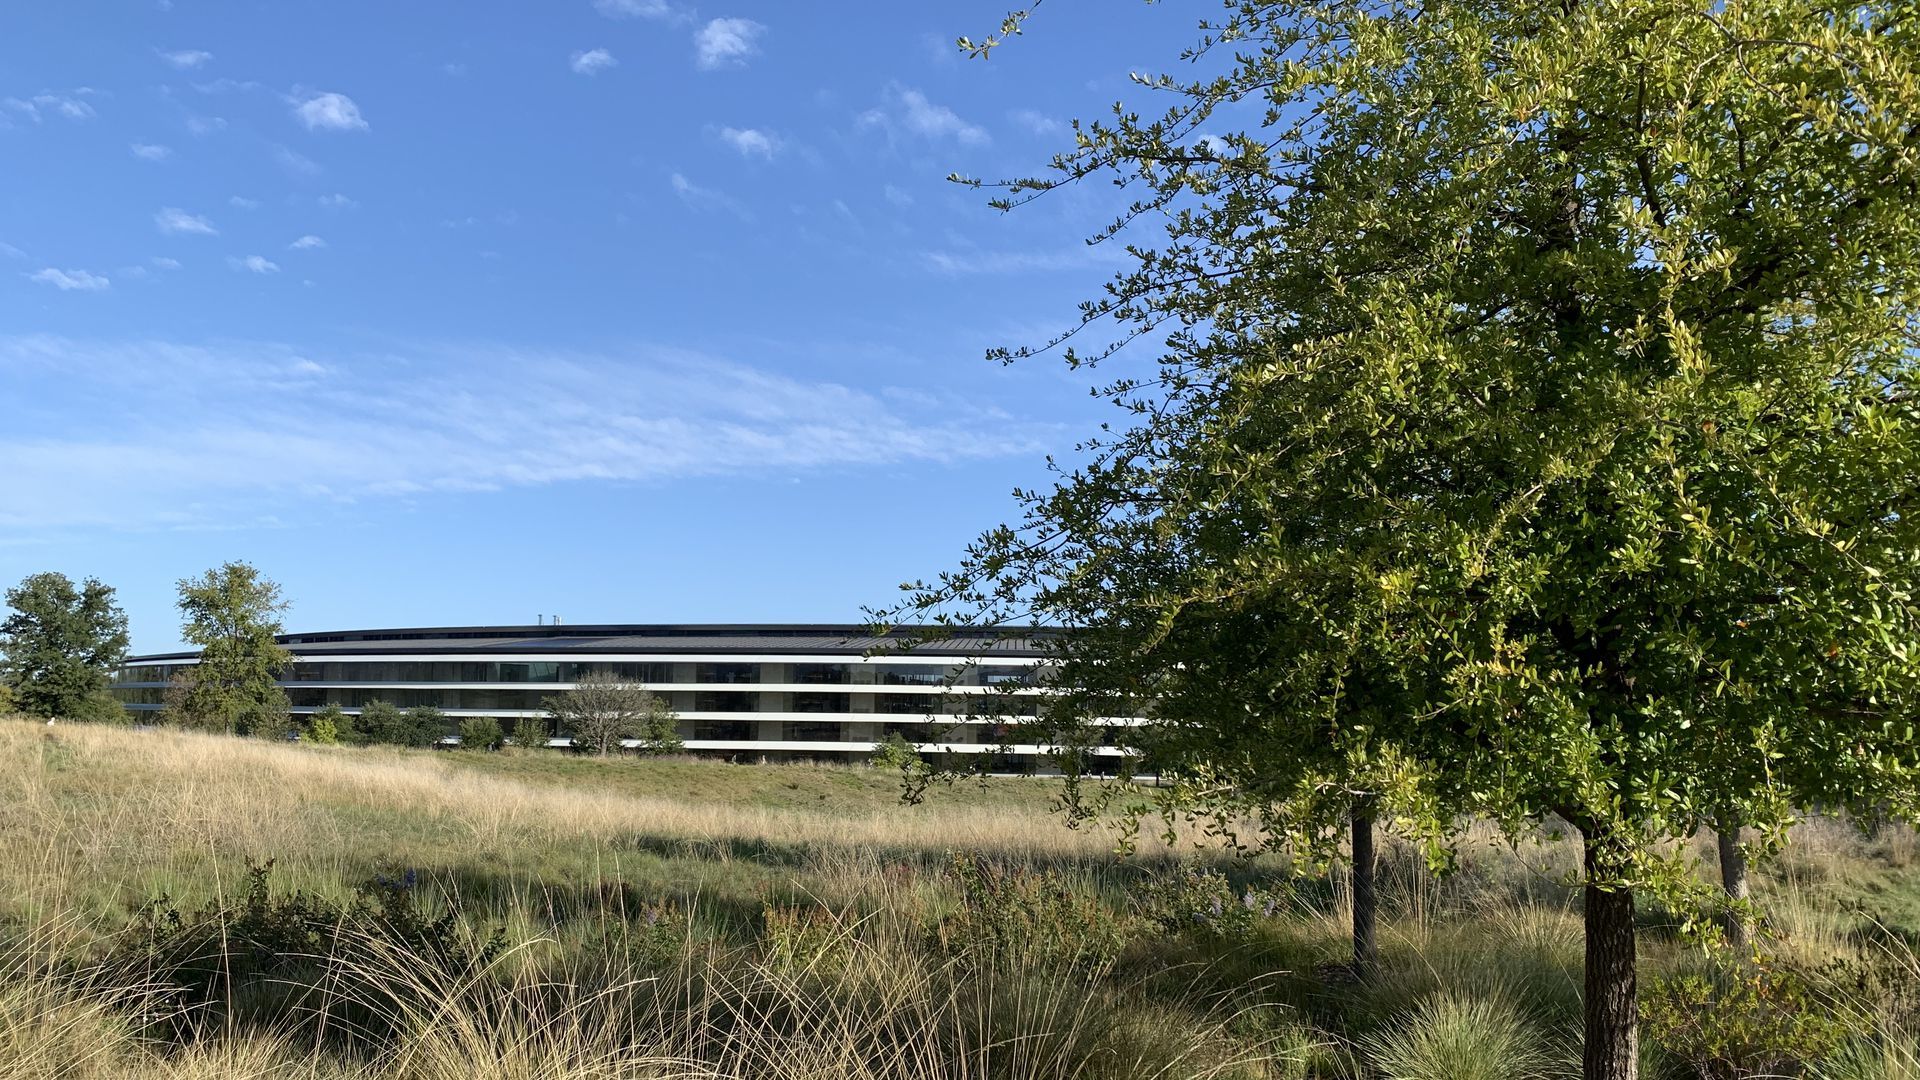 A picture of Apple Park, Apple's "spaceship" campus in Cupertino. 